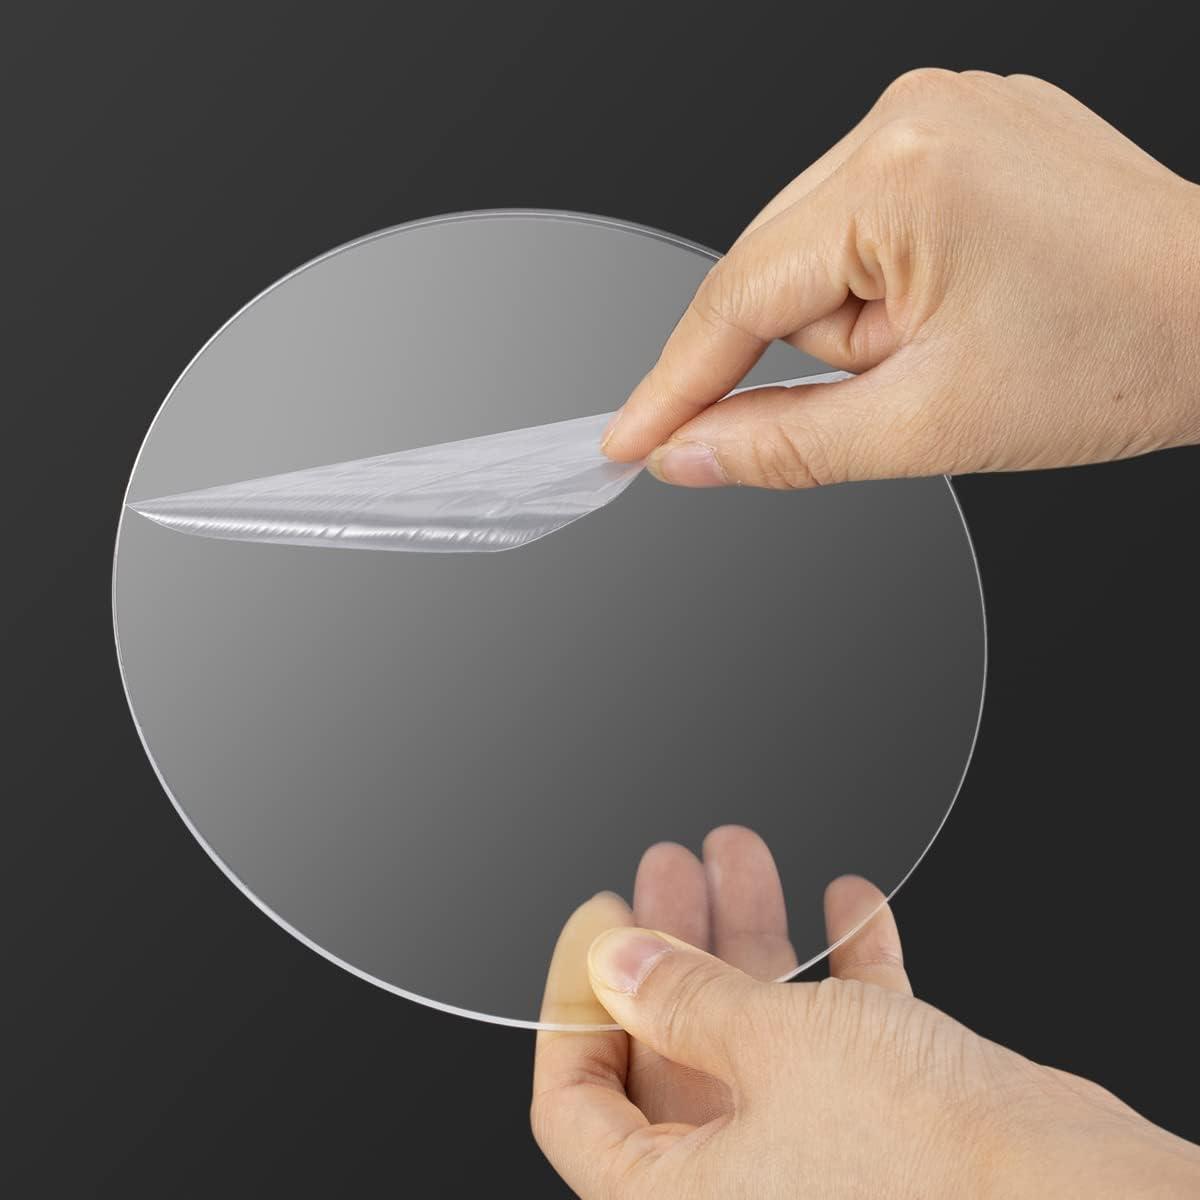 2 Pieces Clear Acrylic Discs 10 * 10 Inch Blank Clear Round Acrylic Disc  Panel 0.12 Inch Thick Frame Painting Milestones Desk Protection DIY Acrylic  Cake disc and Craft Supplies 10*10in